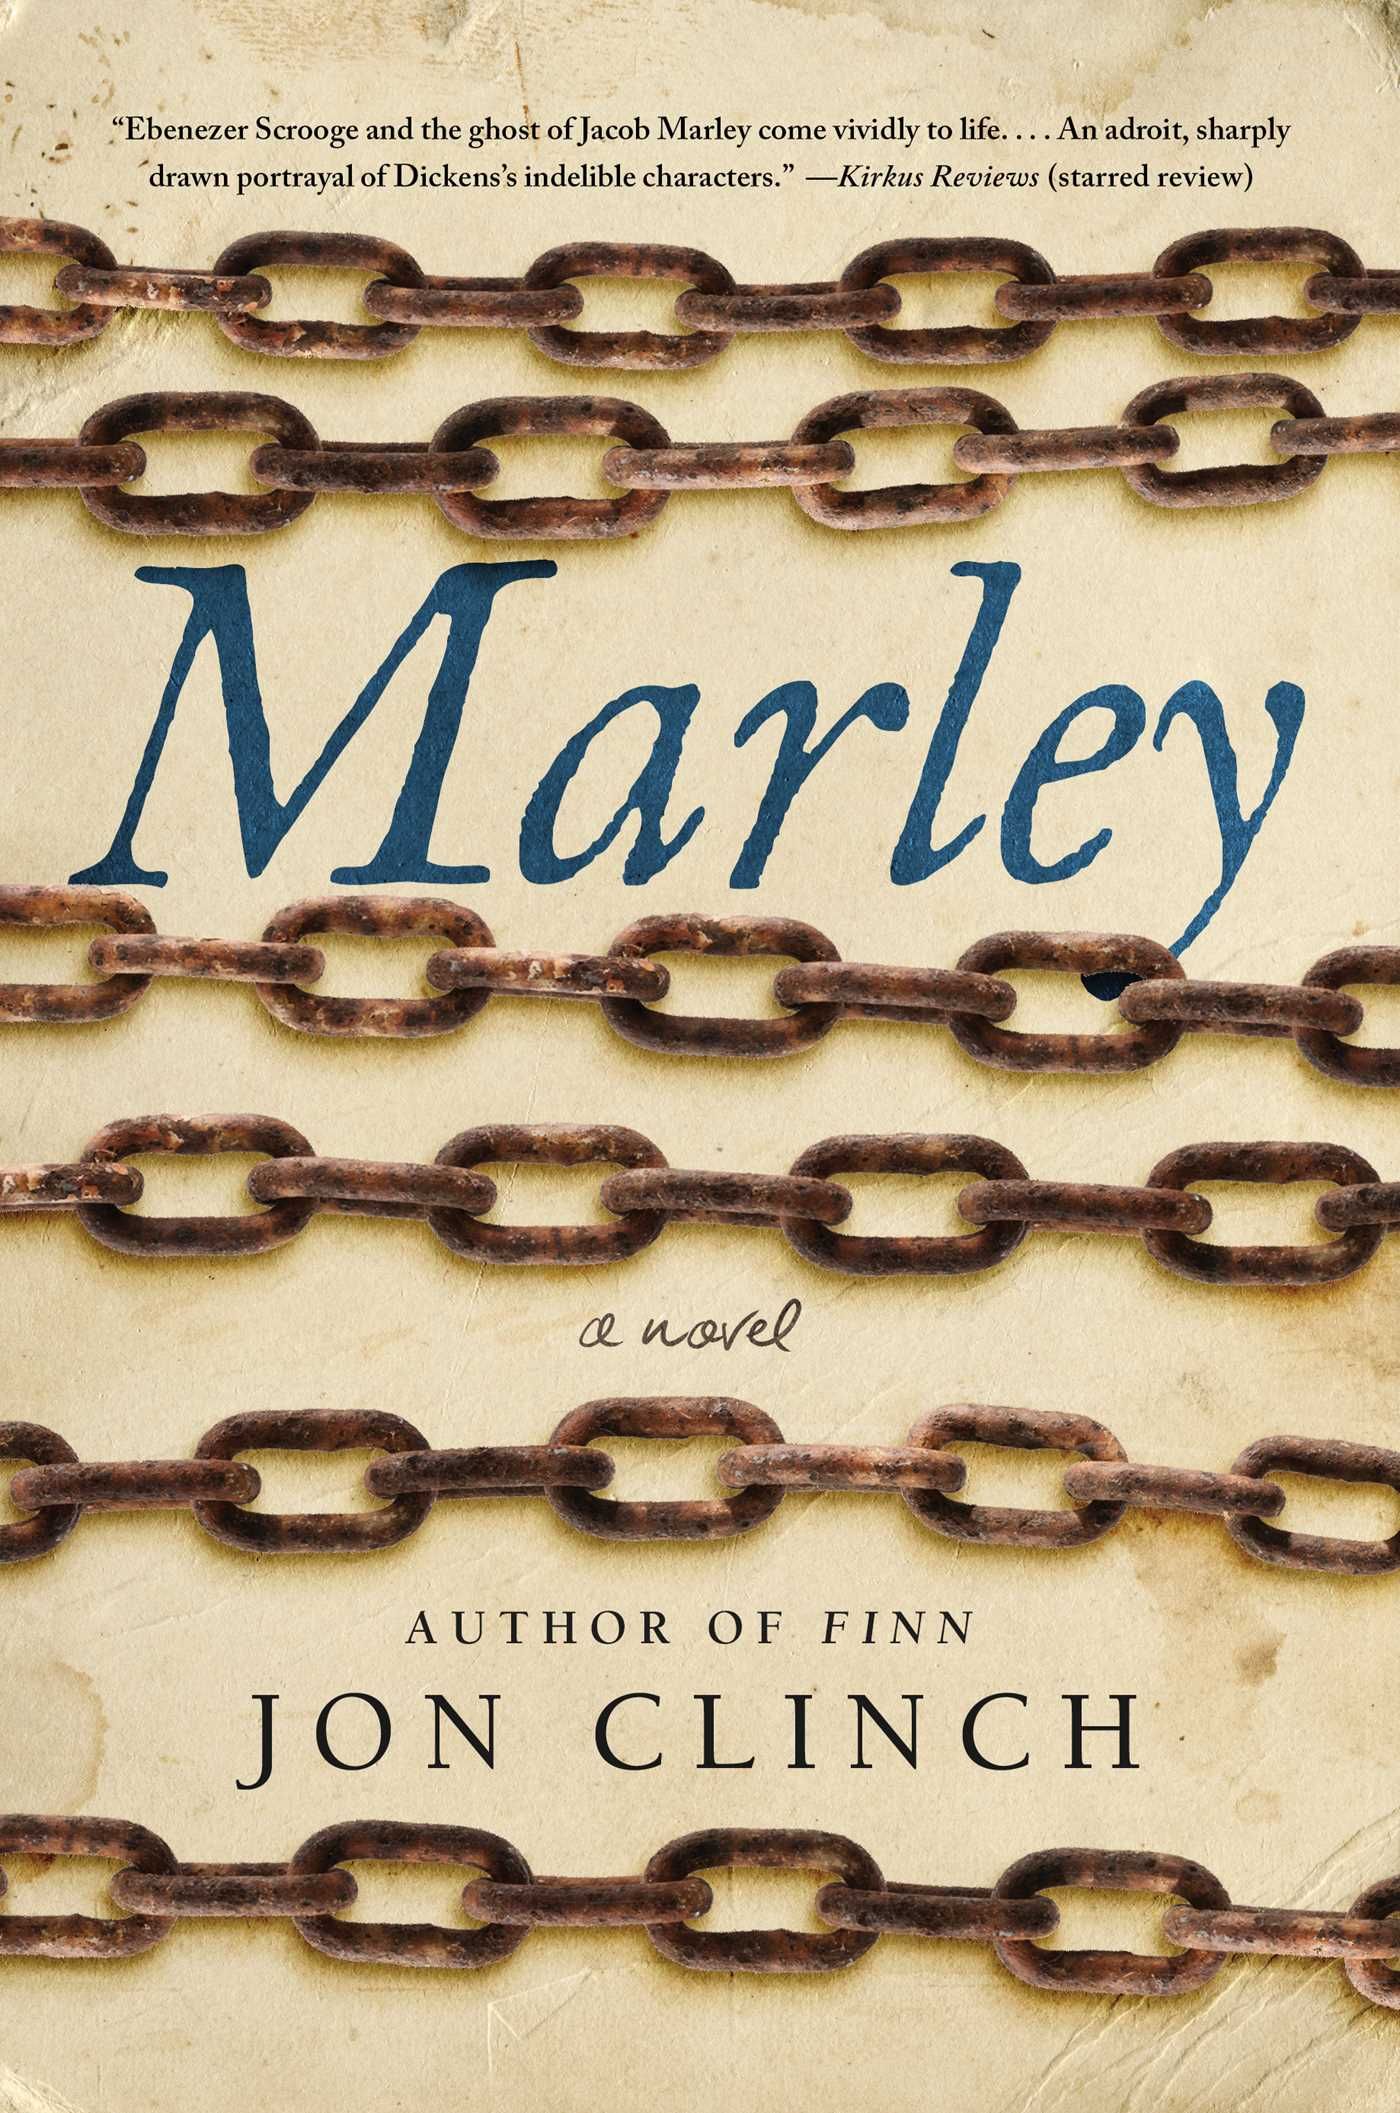 Marley by Jon Clinch book cover